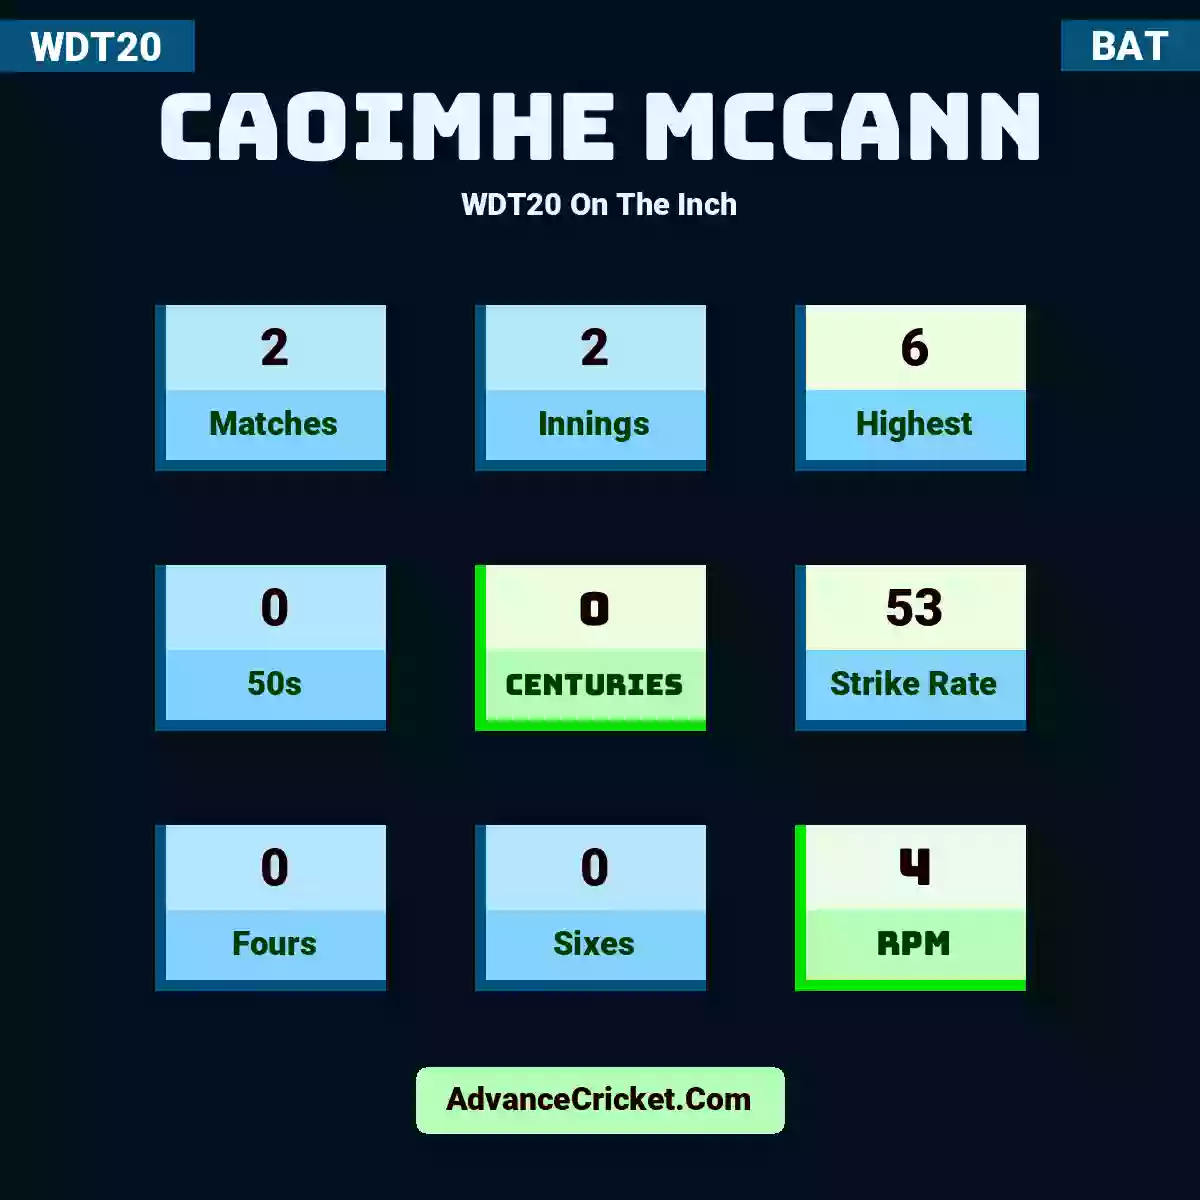 Caoimhe McCann WDT20  On The Inch, Caoimhe McCann played 2 matches, scored 6 runs as highest, 0 half-centuries, and 0 centuries, with a strike rate of 53. C.McCann hit 0 fours and 0 sixes, with an RPM of 4.